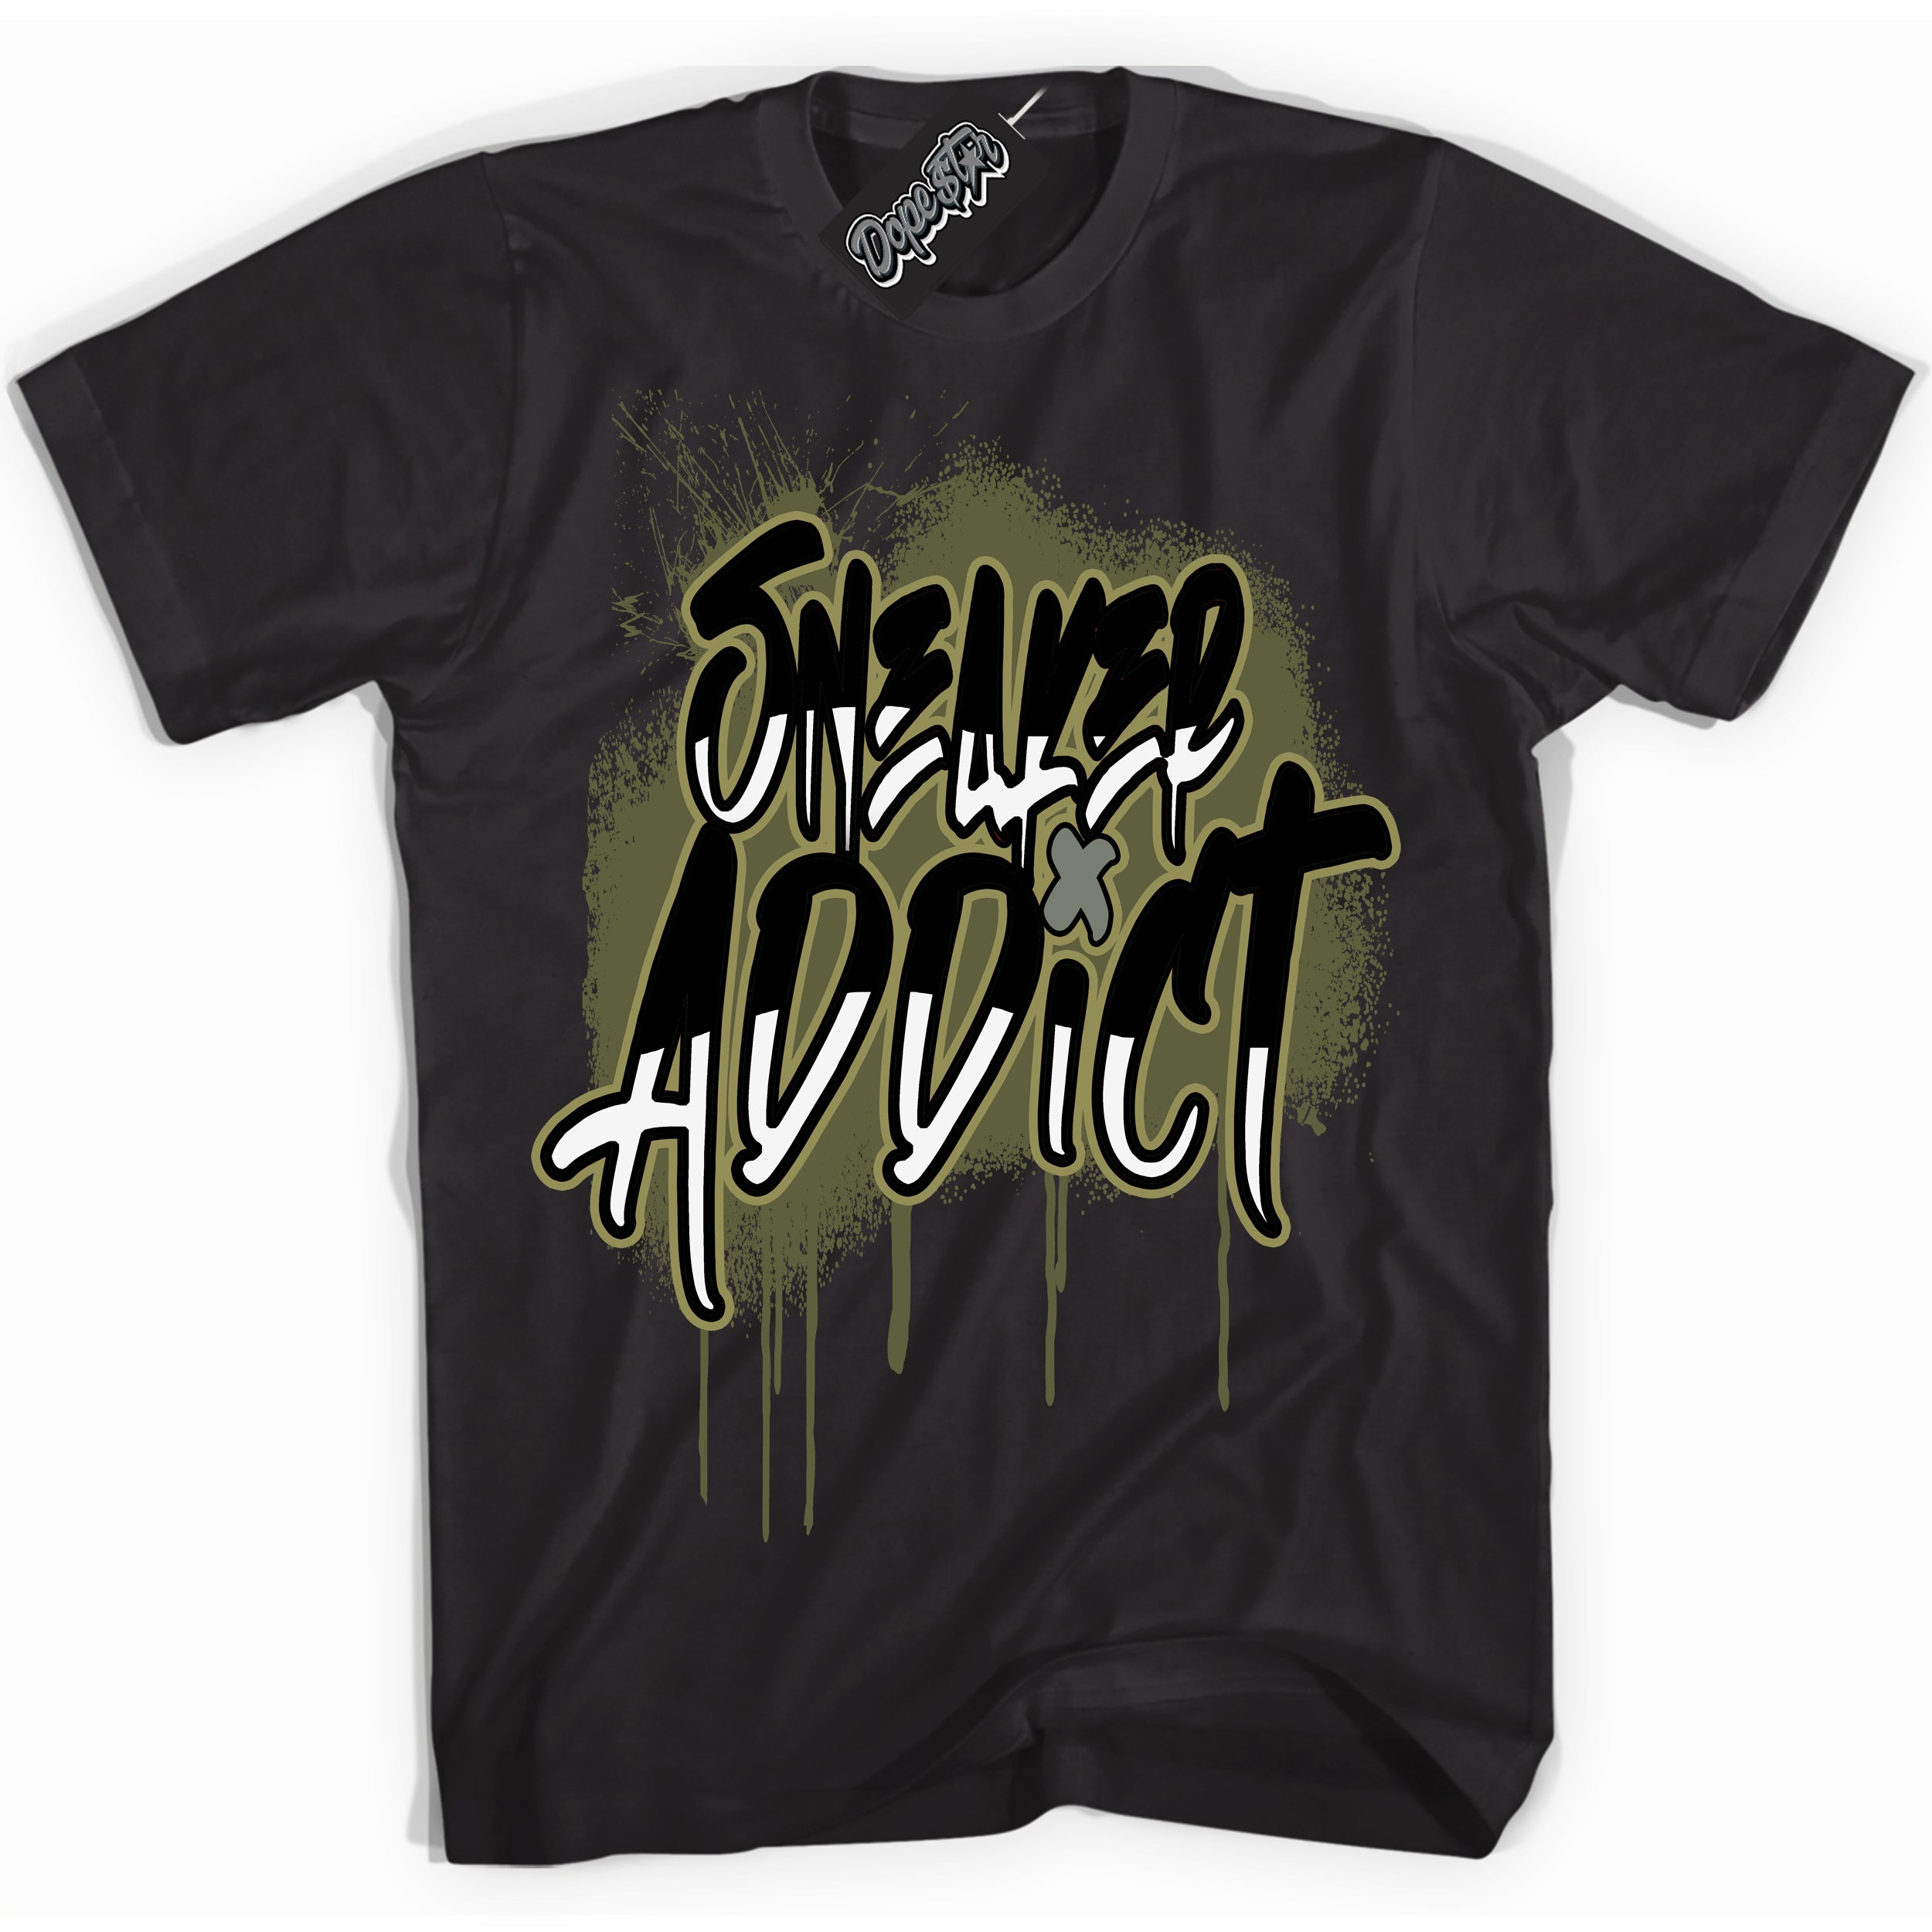 Cool Black graphic tee with “ Sneaker Addict ” print, that perfectly matches Craft Olive 4s sneakers 